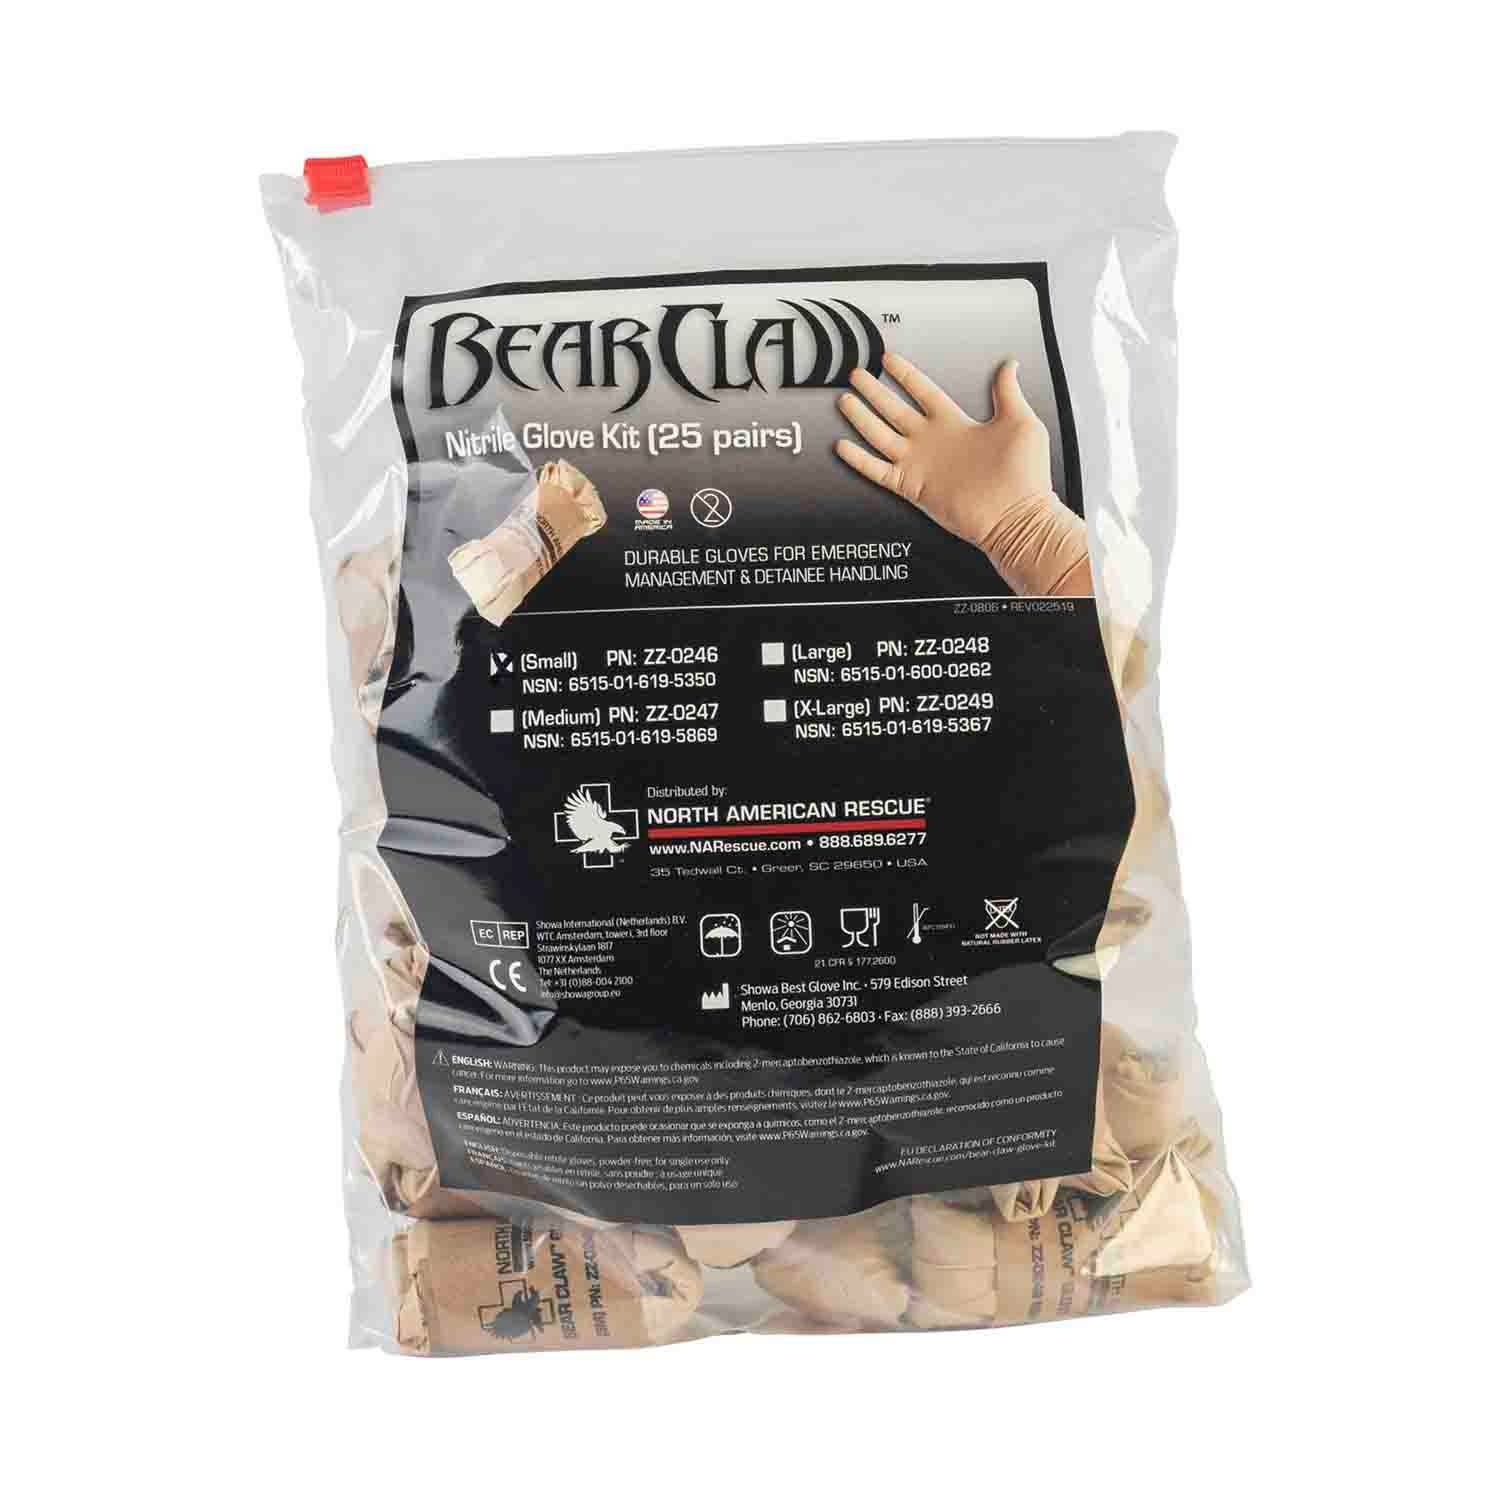 North American Rescue Bear Claw Nitrile Gloves Kit